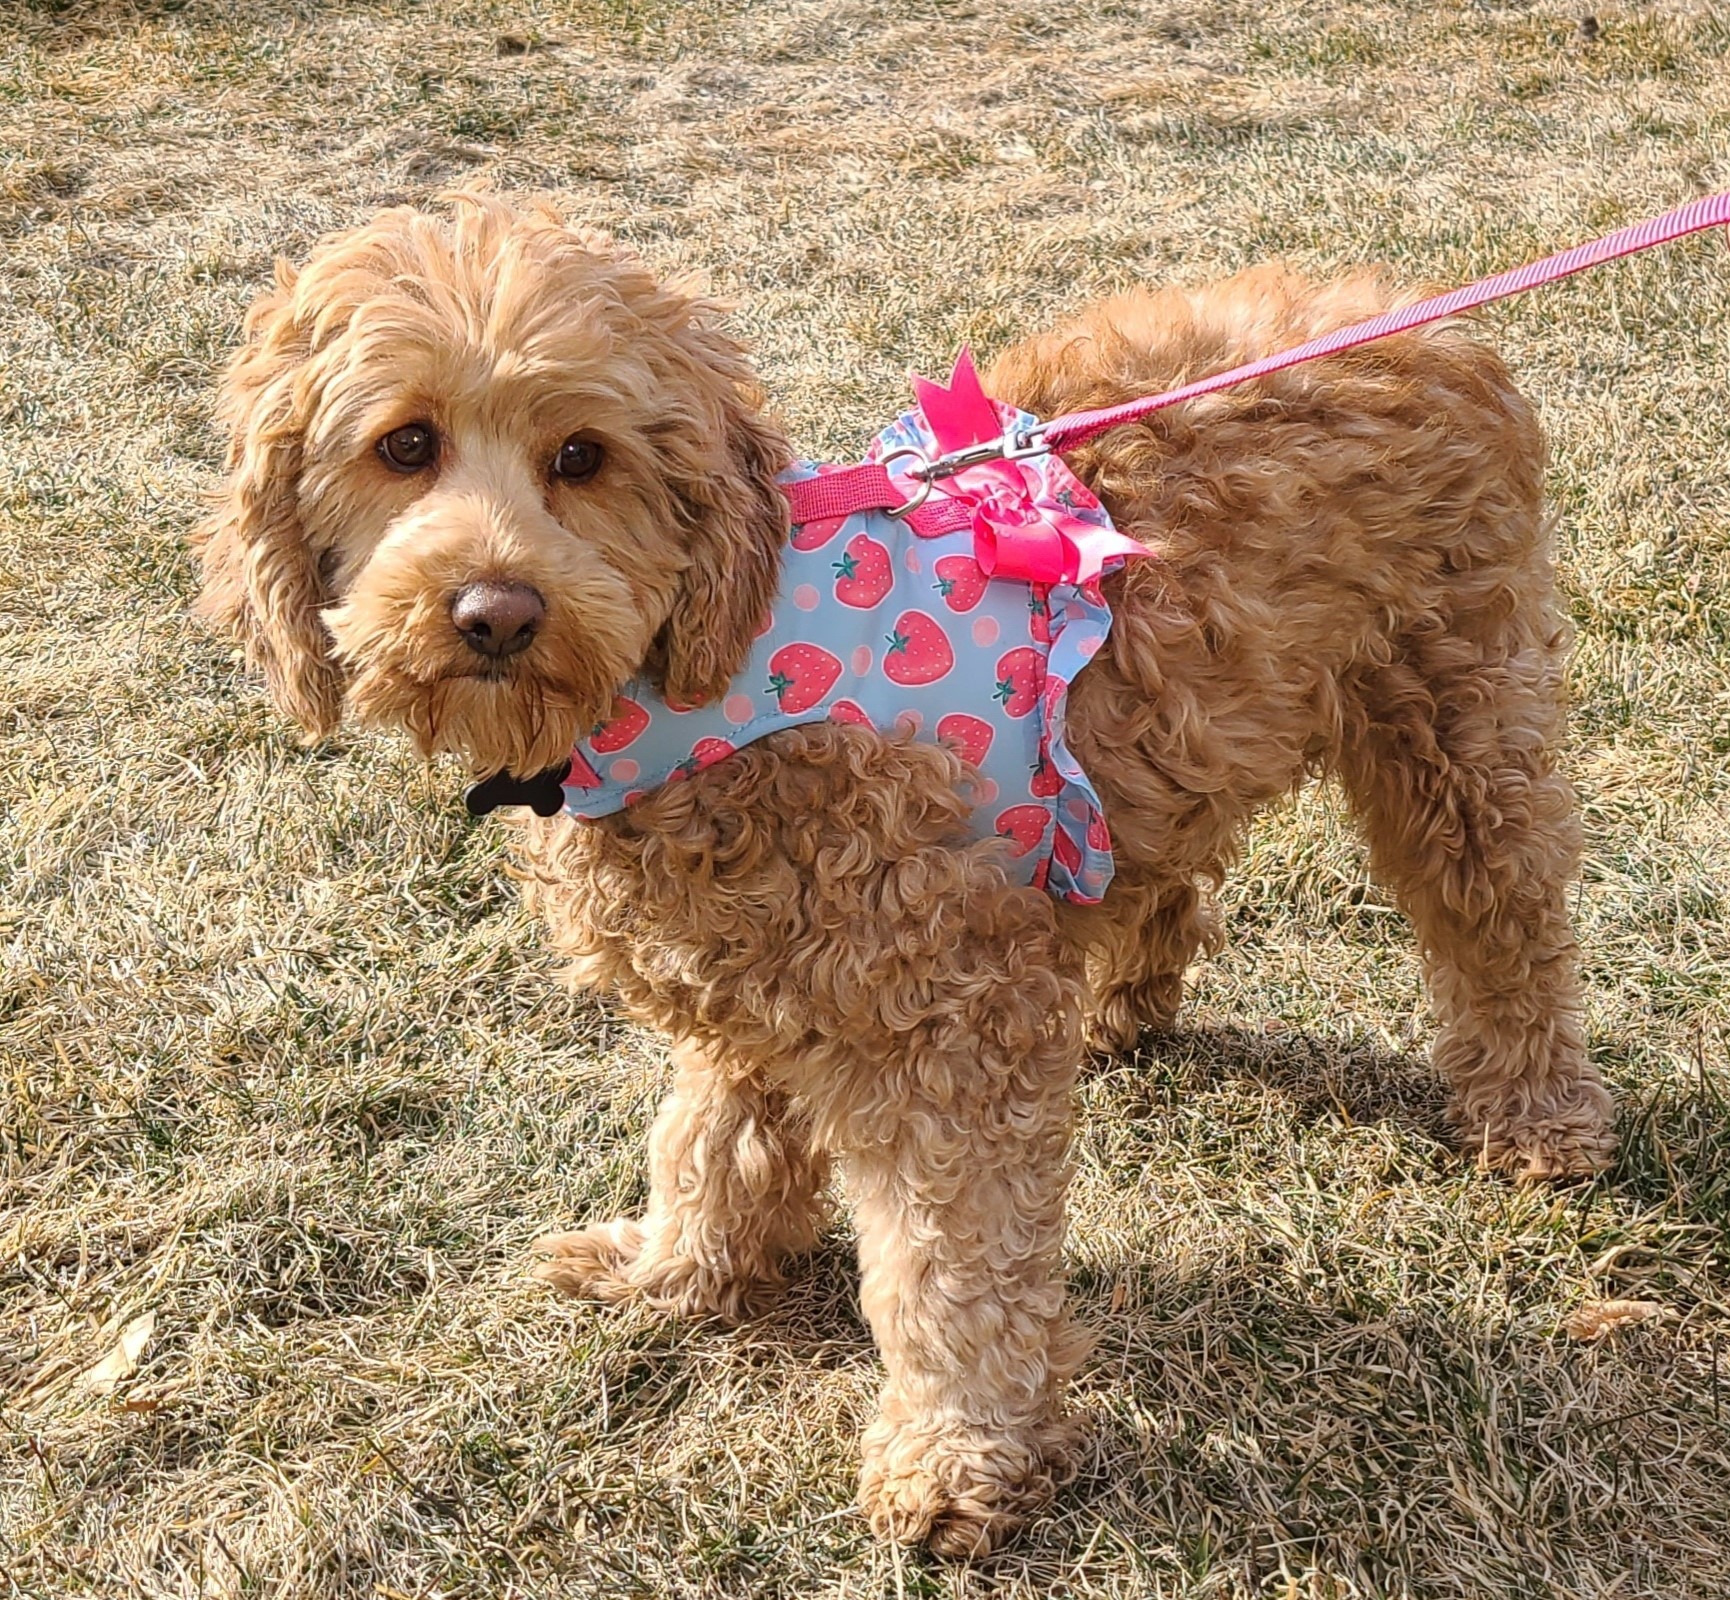 Clover C 23-22104-2, an adoptable Cockapoo in Parker, CO, 80134 | Photo Image 1